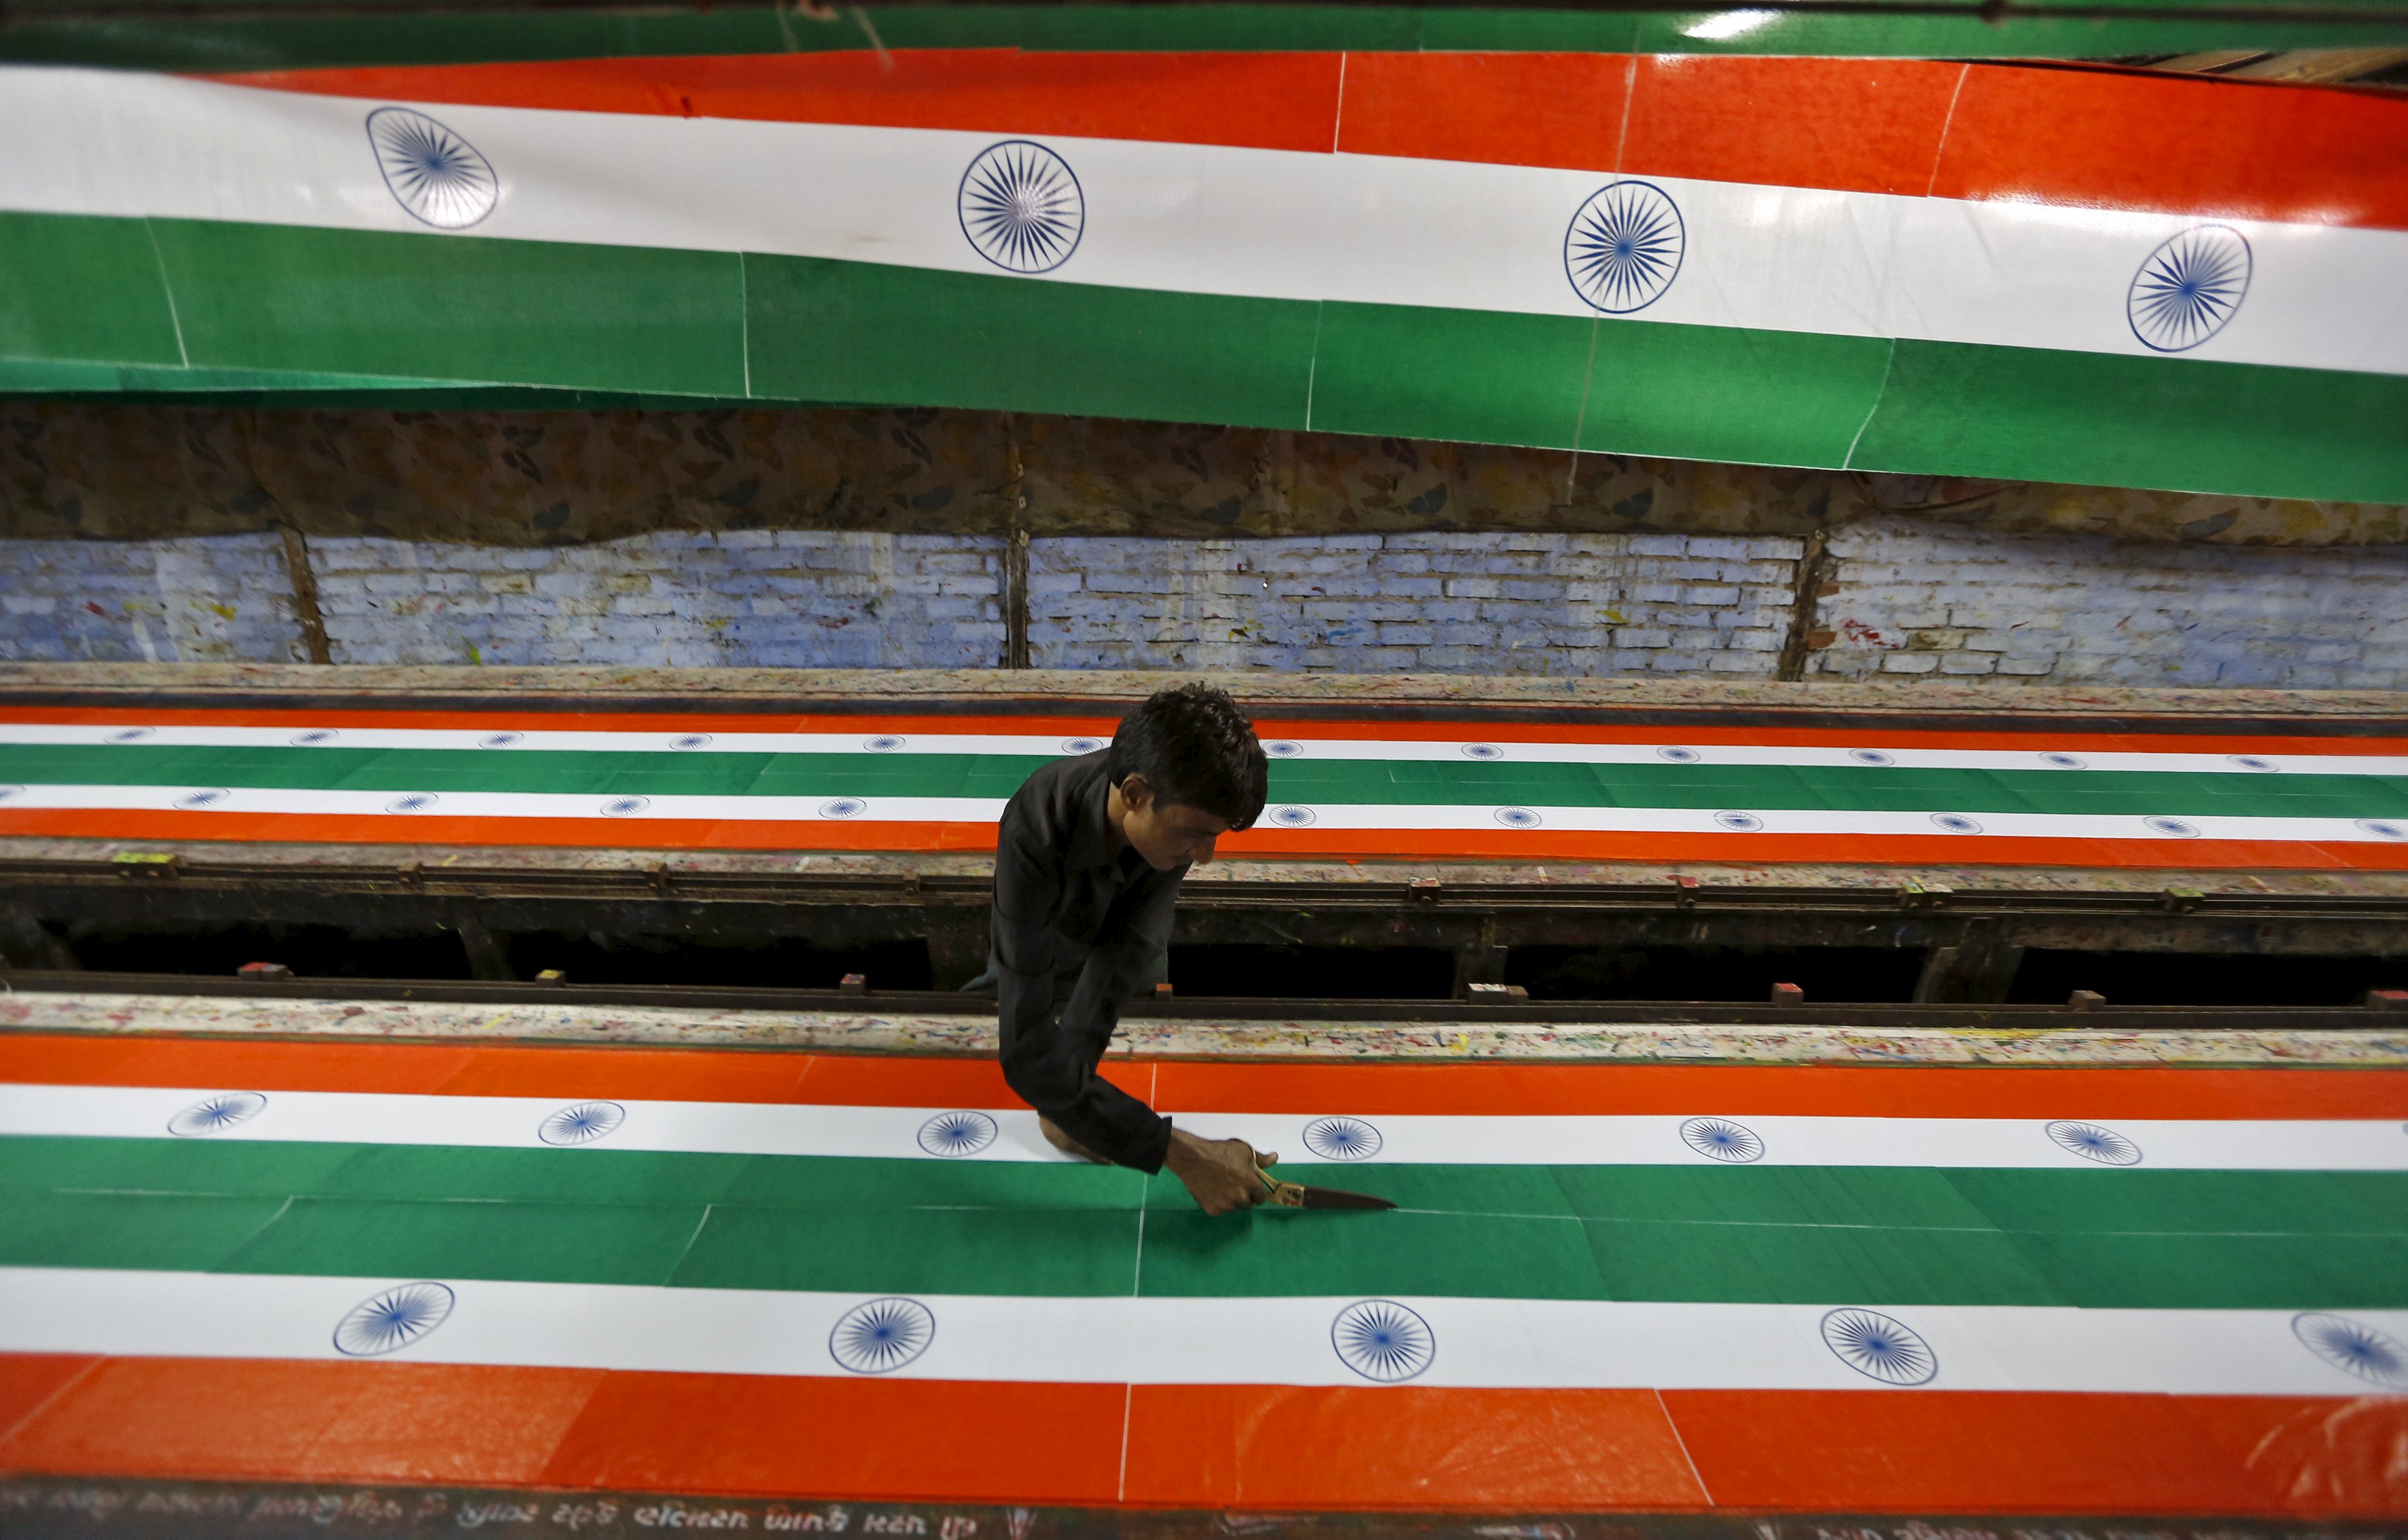 Indian national flags are being made ahead of the country's independence day on August 15. Industrialisation has great potential in India. Photo: Reuters